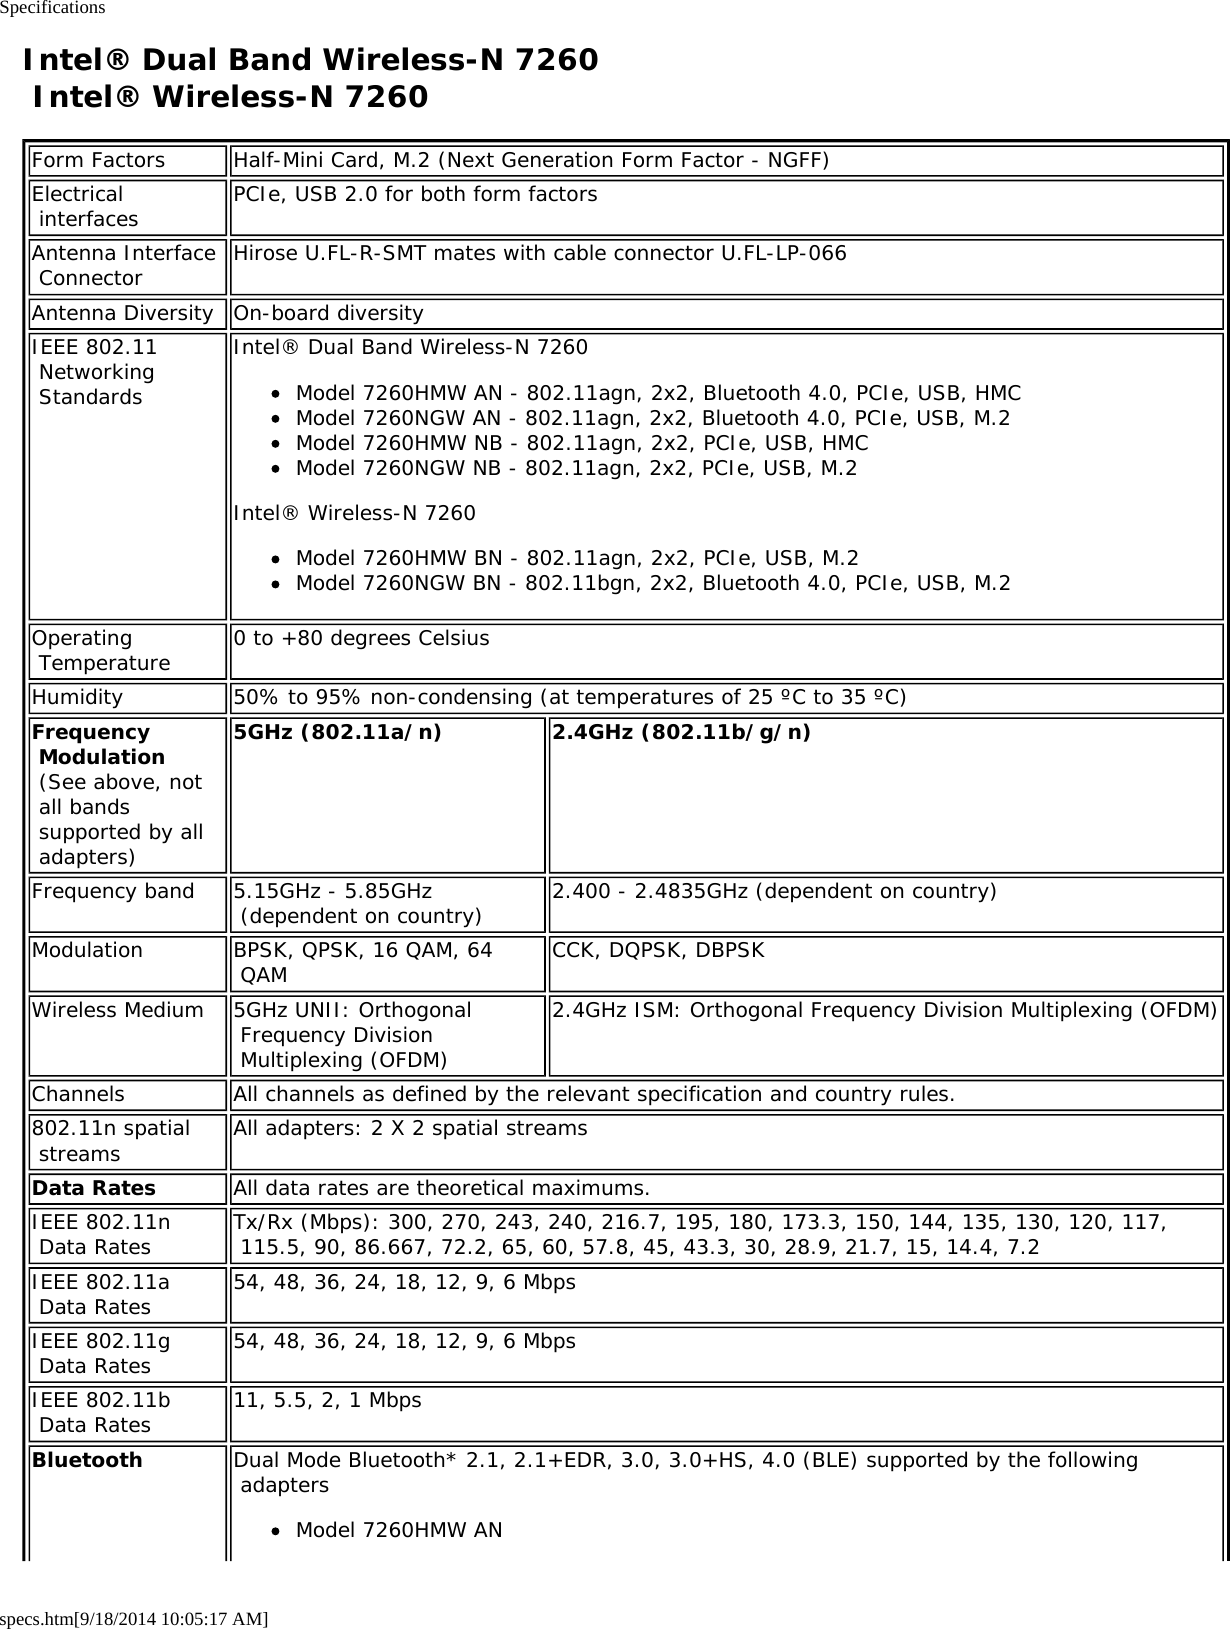 Specificationsspecs.htm[9/18/2014 10:05:17 AM]Intel® Dual Band Wireless-N 7260 Intel® Wireless-N 7260Form Factors Half-Mini Card, M.2 (Next Generation Form Factor - NGFF)Electrical interfaces PCIe, USB 2.0 for both form factorsAntenna Interface Connector Hirose U.FL-R-SMT mates with cable connector U.FL-LP-066Antenna Diversity On-board diversityIEEE 802.11 Networking StandardsIntel® Dual Band Wireless-N 7260Model 7260HMW AN - 802.11agn, 2x2, Bluetooth 4.0, PCIe, USB, HMCModel 7260NGW AN - 802.11agn, 2x2, Bluetooth 4.0, PCIe, USB, M.2Model 7260HMW NB - 802.11agn, 2x2, PCIe, USB, HMCModel 7260NGW NB - 802.11agn, 2x2, PCIe, USB, M.2Intel® Wireless-N 7260Model 7260HMW BN - 802.11agn, 2x2, PCIe, USB, M.2Model 7260NGW BN - 802.11bgn, 2x2, Bluetooth 4.0, PCIe, USB, M.2Operating Temperature 0 to +80 degrees CelsiusHumidity 50% to 95% non-condensing (at temperatures of 25 ºC to 35 ºC)Frequency Modulation (See above, not all bands supported by all adapters)5GHz (802.11a/n) 2.4GHz (802.11b/g/n)Frequency band 5.15GHz - 5.85GHz (dependent on country) 2.400 - 2.4835GHz (dependent on country)Modulation BPSK, QPSK, 16 QAM, 64 QAM CCK, DQPSK, DBPSKWireless Medium 5GHz UNII: Orthogonal Frequency Division Multiplexing (OFDM)2.4GHz ISM: Orthogonal Frequency Division Multiplexing (OFDM)Channels All channels as defined by the relevant specification and country rules.802.11n spatial streams All adapters: 2 X 2 spatial streamsData Rates All data rates are theoretical maximums.IEEE 802.11n Data Rates Tx/Rx (Mbps): 300, 270, 243, 240, 216.7, 195, 180, 173.3, 150, 144, 135, 130, 120, 117, 115.5, 90, 86.667, 72.2, 65, 60, 57.8, 45, 43.3, 30, 28.9, 21.7, 15, 14.4, 7.2IEEE 802.11a Data Rates 54, 48, 36, 24, 18, 12, 9, 6 MbpsIEEE 802.11g Data Rates 54, 48, 36, 24, 18, 12, 9, 6 MbpsIEEE 802.11b Data Rates 11, 5.5, 2, 1 MbpsBluetooth Dual Mode Bluetooth* 2.1, 2.1+EDR, 3.0, 3.0+HS, 4.0 (BLE) supported by the following adaptersModel 7260HMW AN